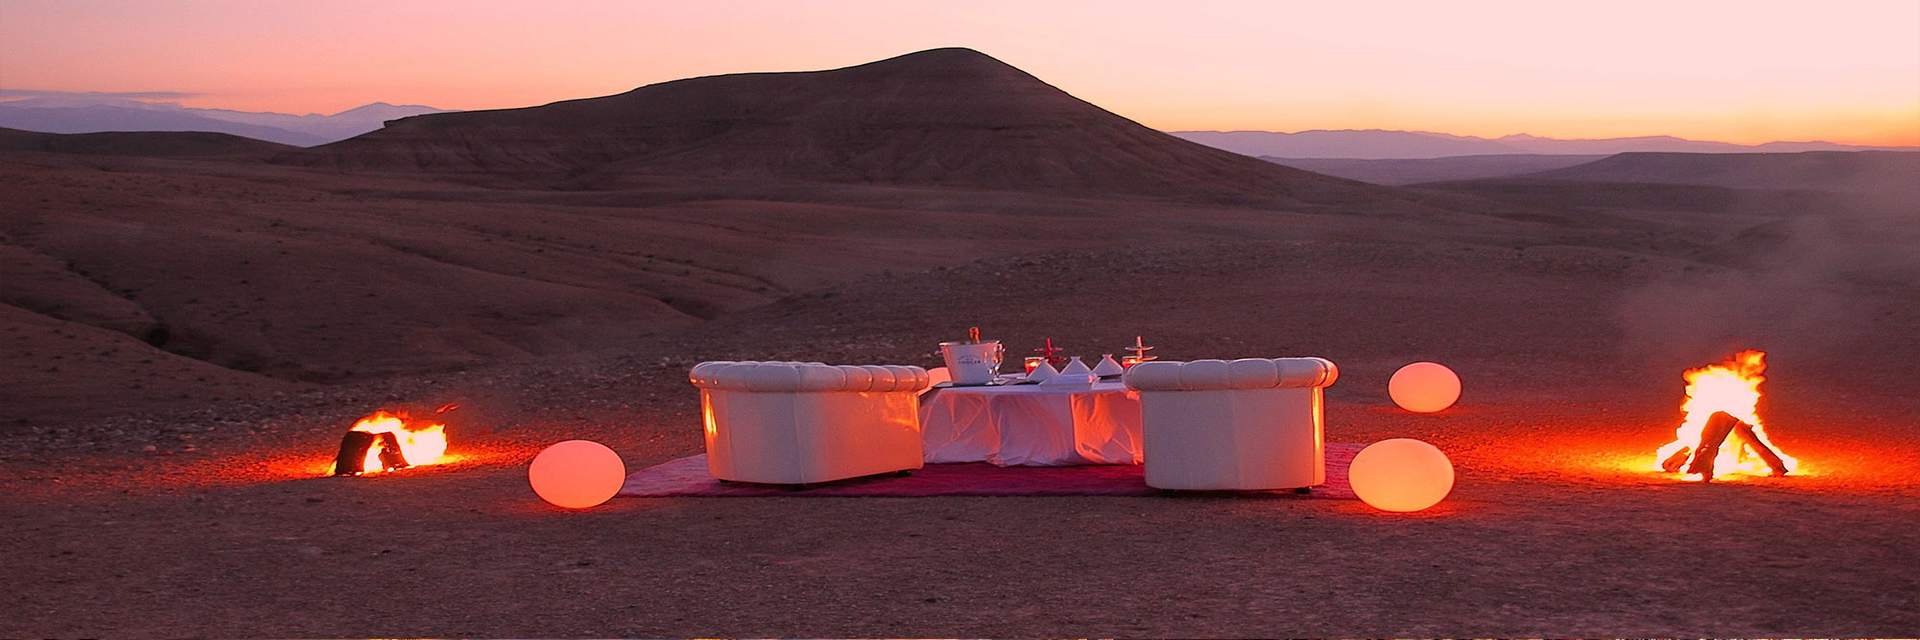 DINNER AT AGAFAY DESERT WITH CAMEL RIDE AND TOUR QUAD